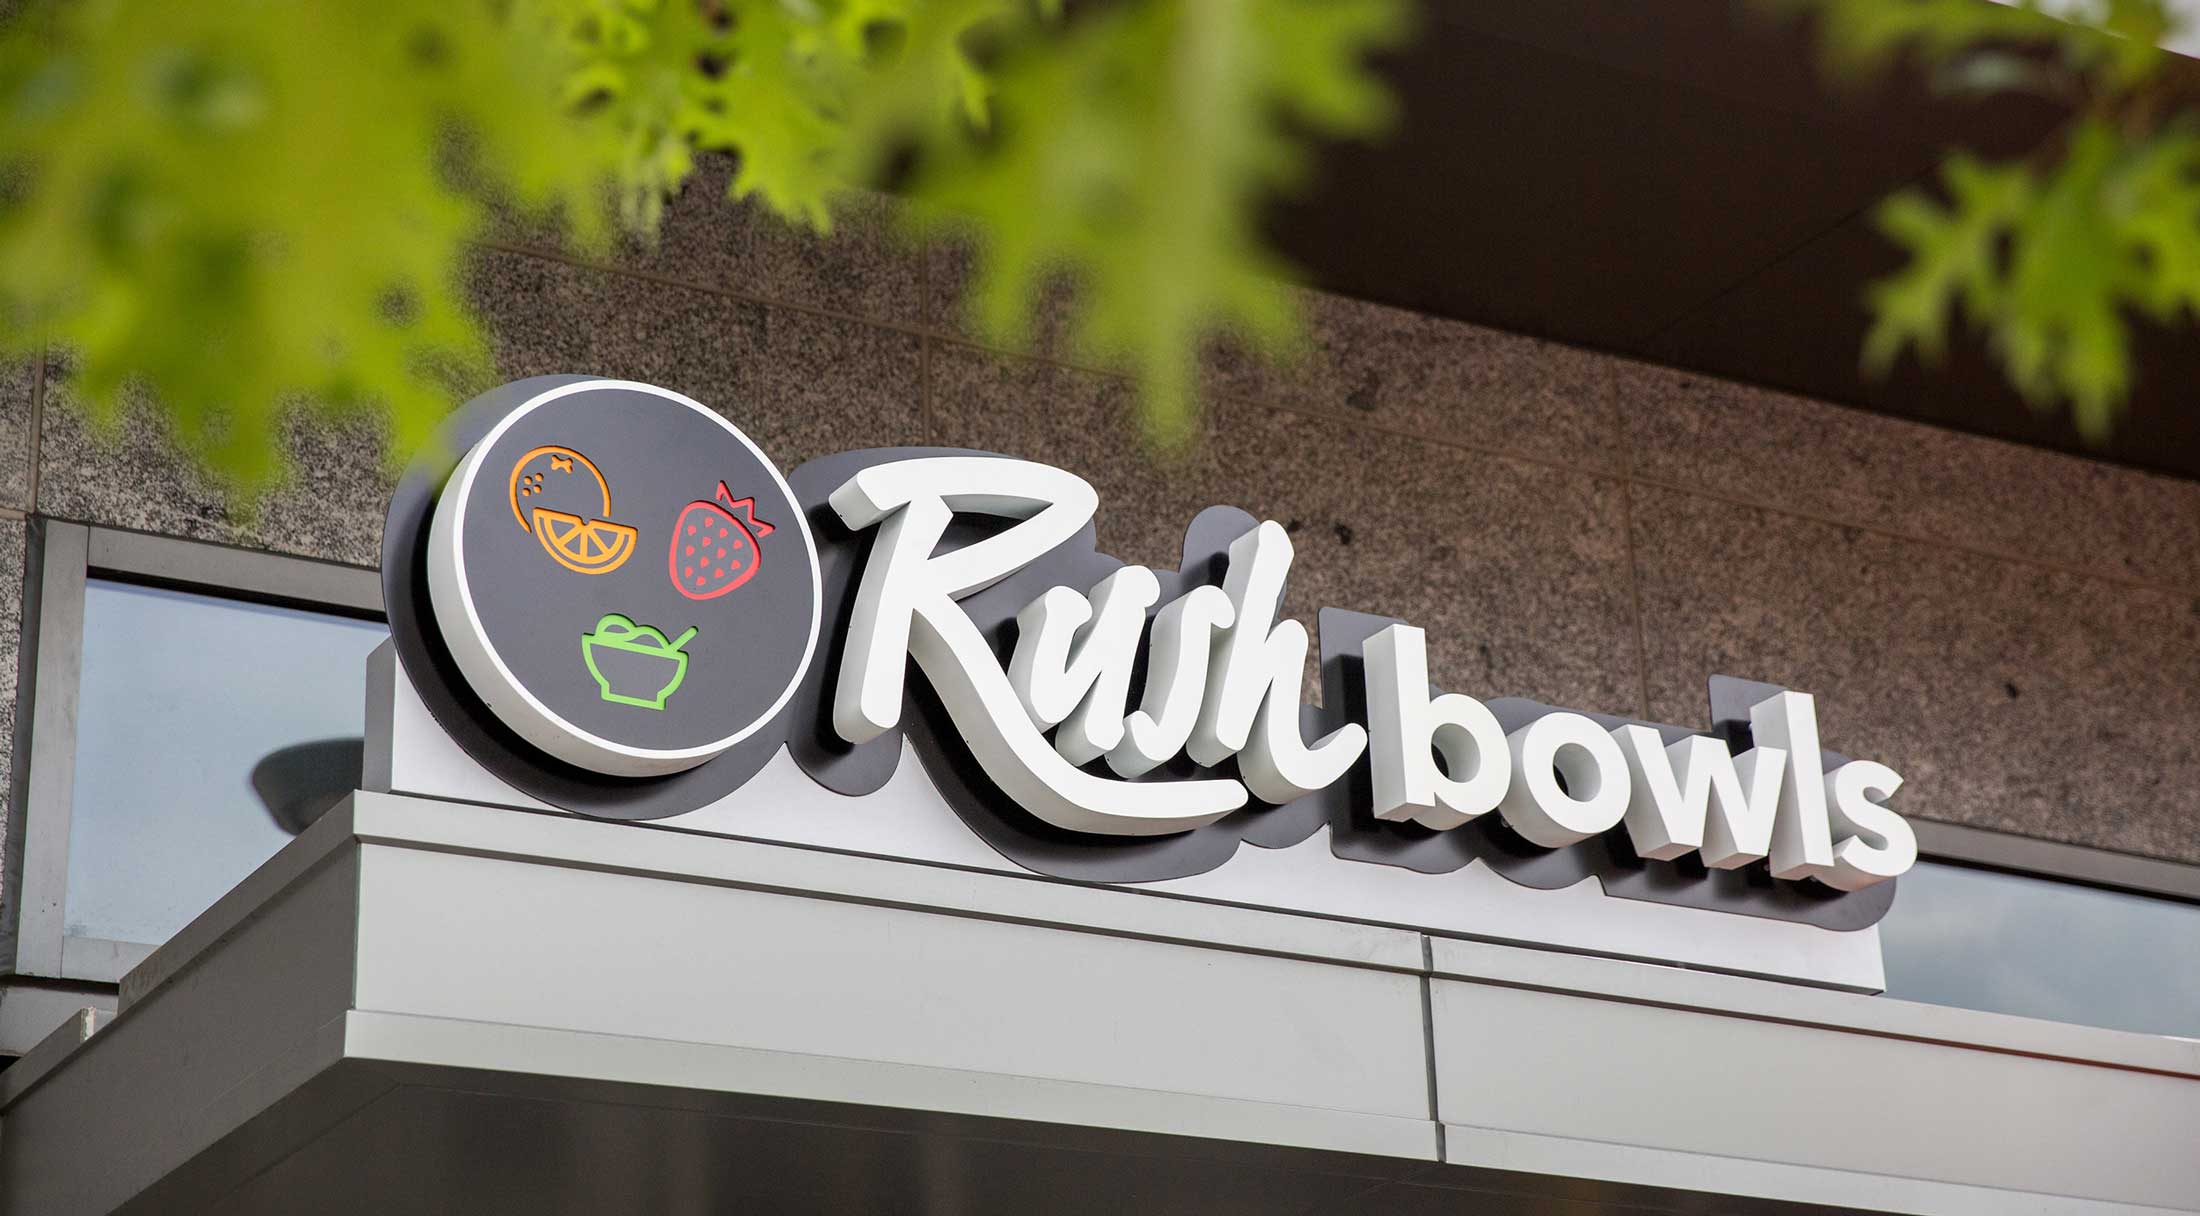 Rush Bowls investment opportunities.